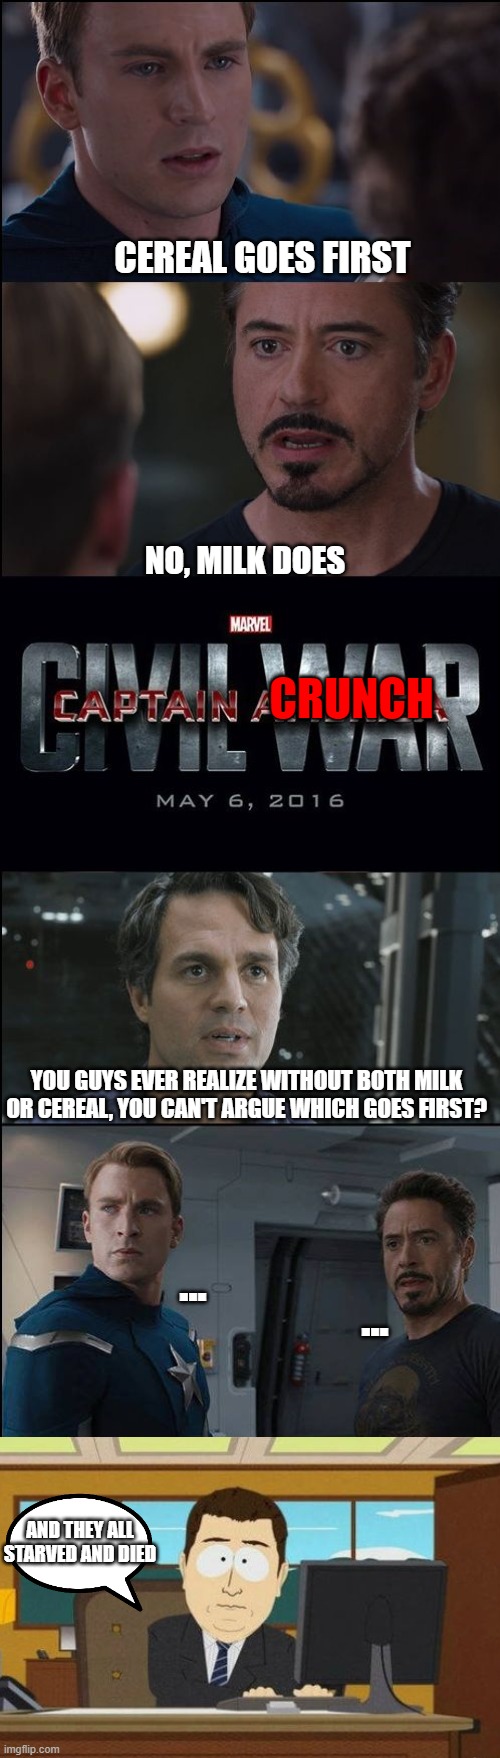 Spent too long debating over breakfast to eat, their time ran out |  CEREAL GOES FIRST; NO, MILK DOES; CRUNCH; YOU GUYS EVER REALIZE WITHOUT BOTH MILK OR CEREAL, YOU CAN'T ARGUE WHICH GOES FIRST? ... ... AND THEY ALL STARVED AND DIED | image tagged in civil war/planet hulk | made w/ Imgflip meme maker